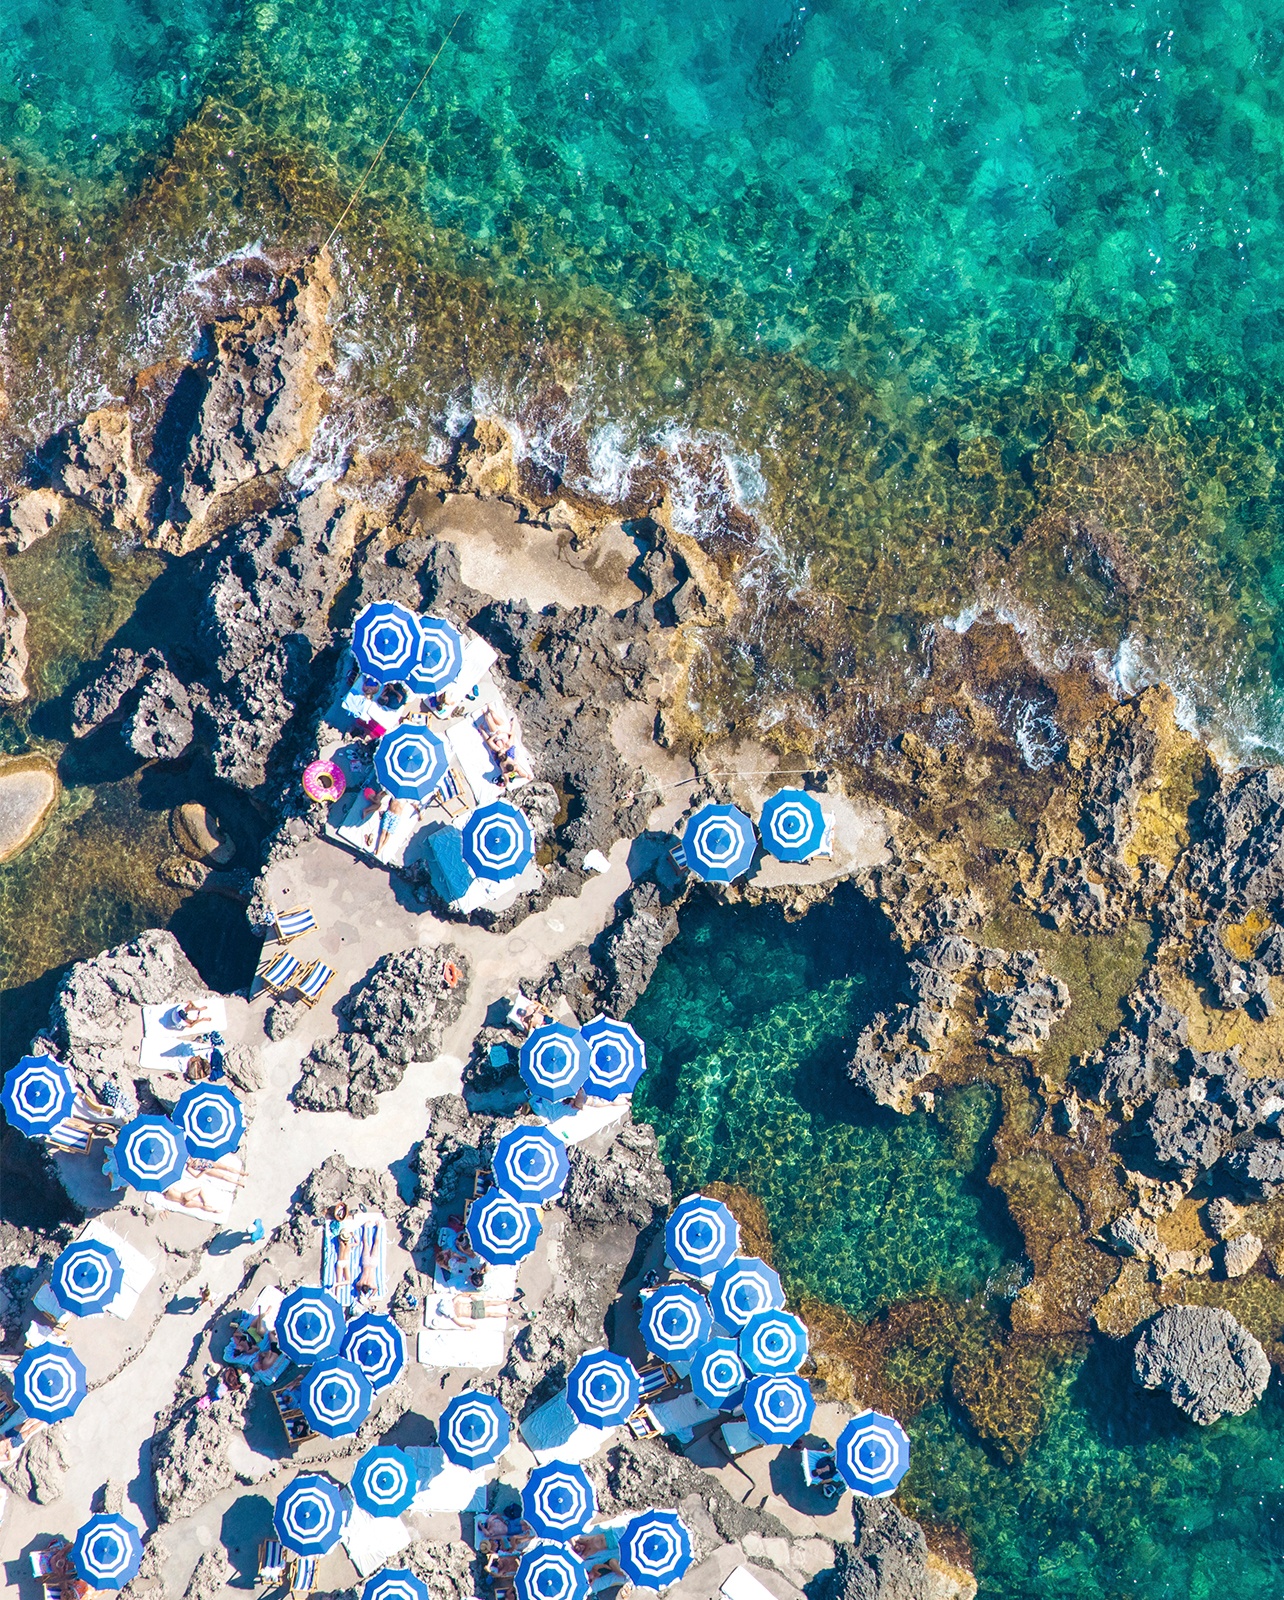 Arial photo of the Mediterranean coast with scattered blue umbrellas